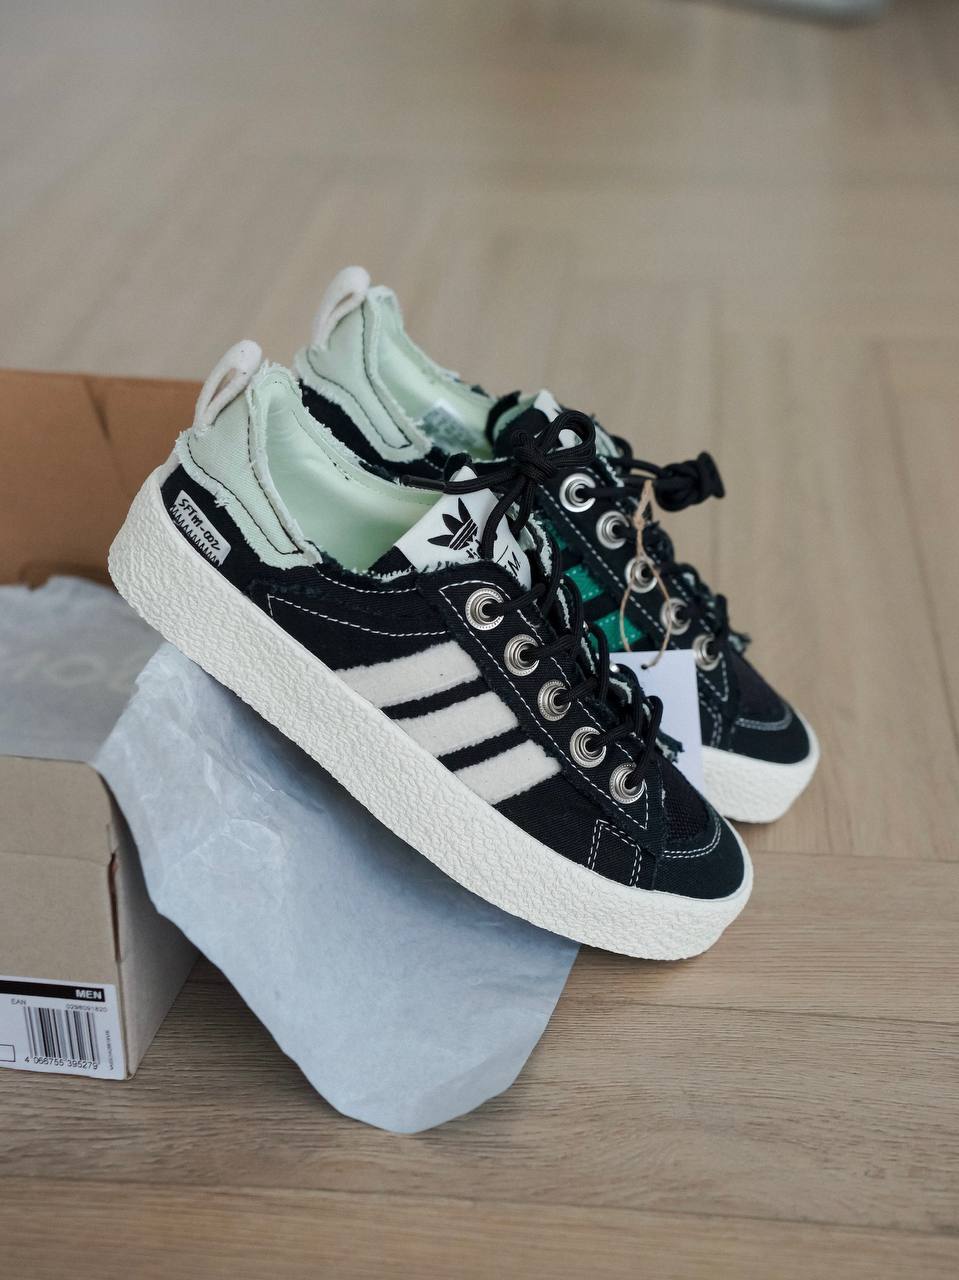 SONG FOR THE MUTE x Adidas originals Campus 80S